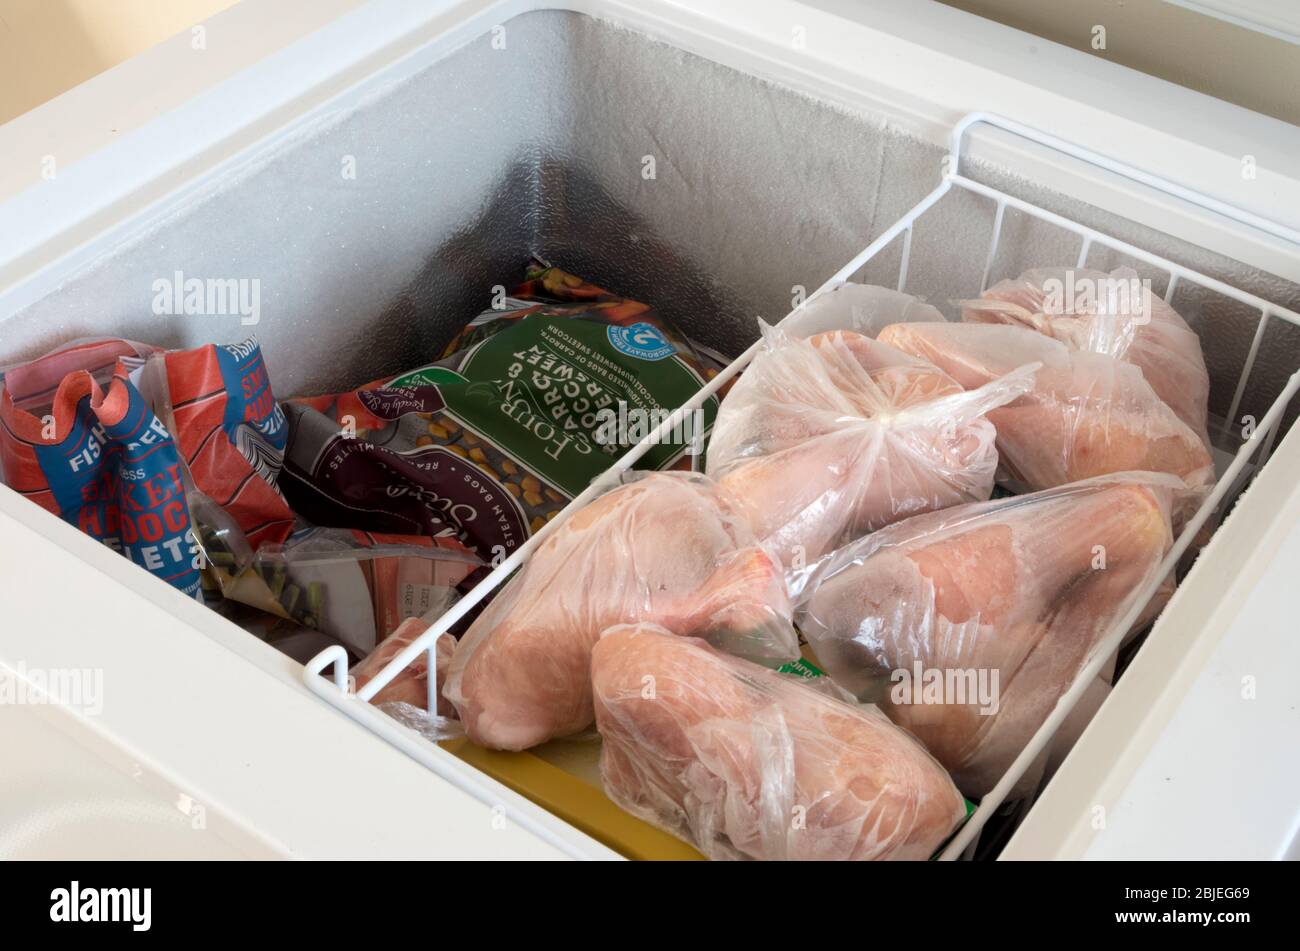 Open Upright Domestic Home Freezer Appliance Showing Contents Including Frozen Chicken Drumsticks Stock Photo